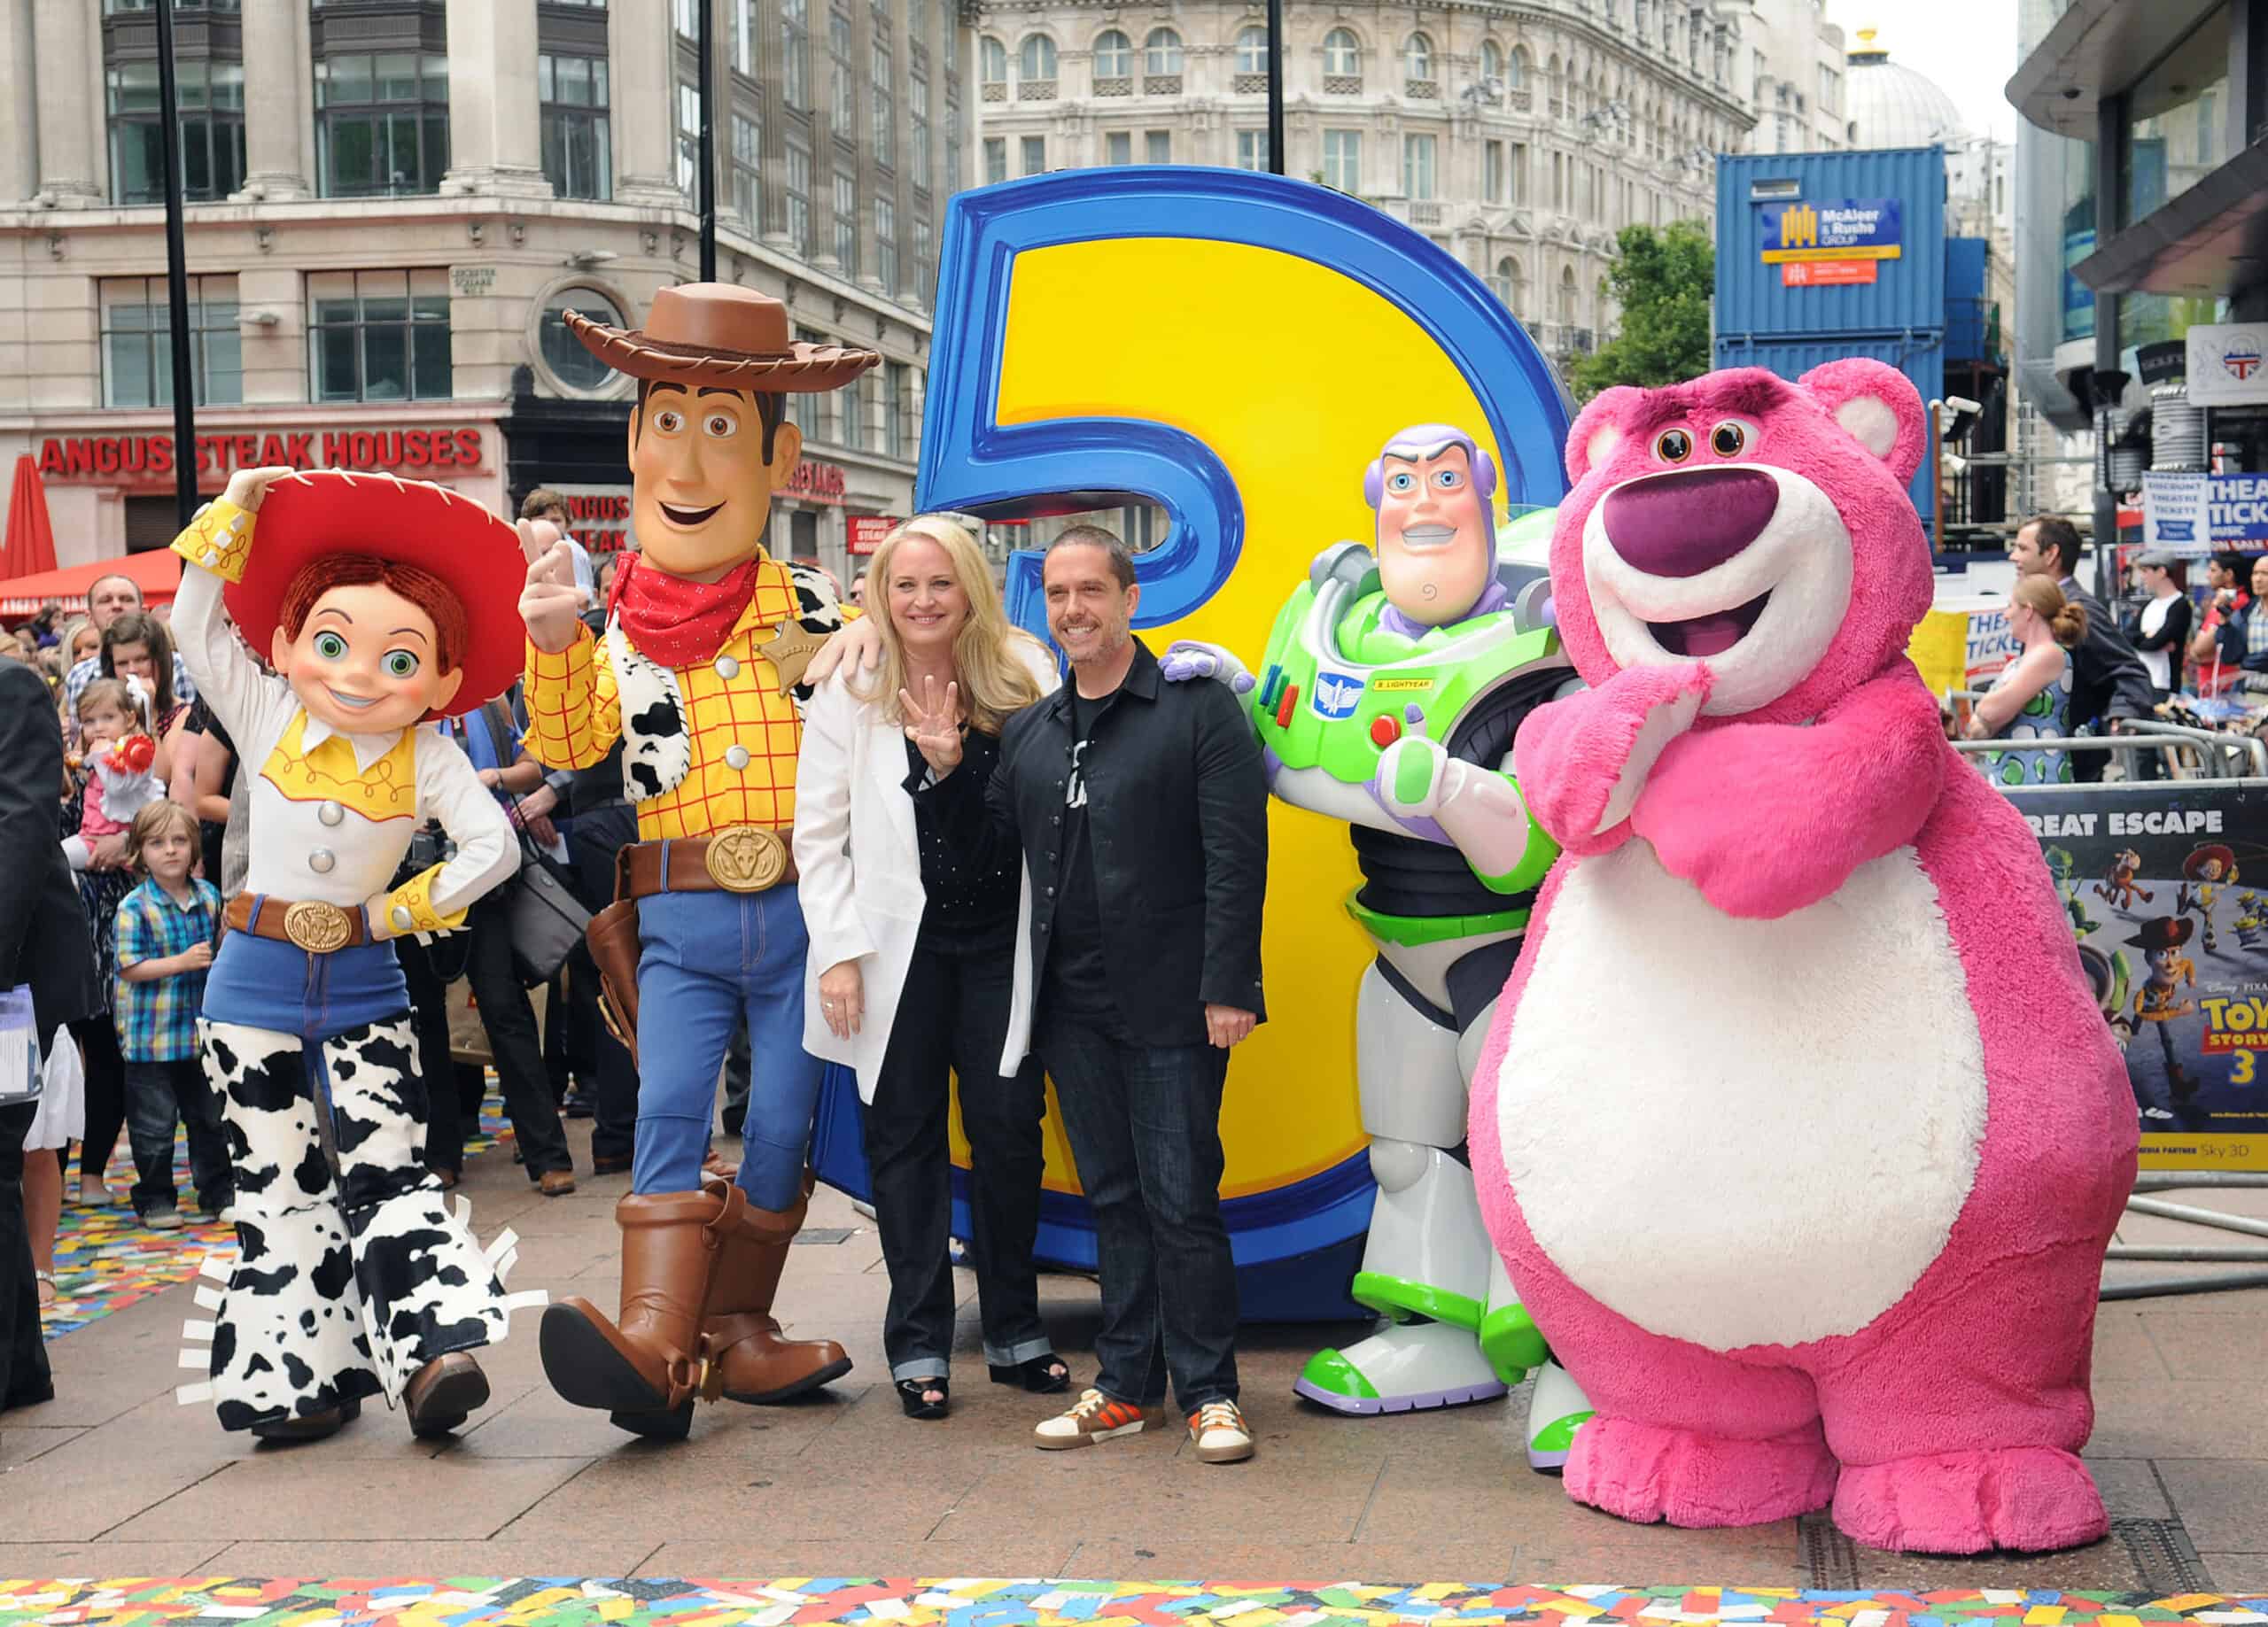 Toy Story 3 - UK Film Premiere: Outside Arrivals